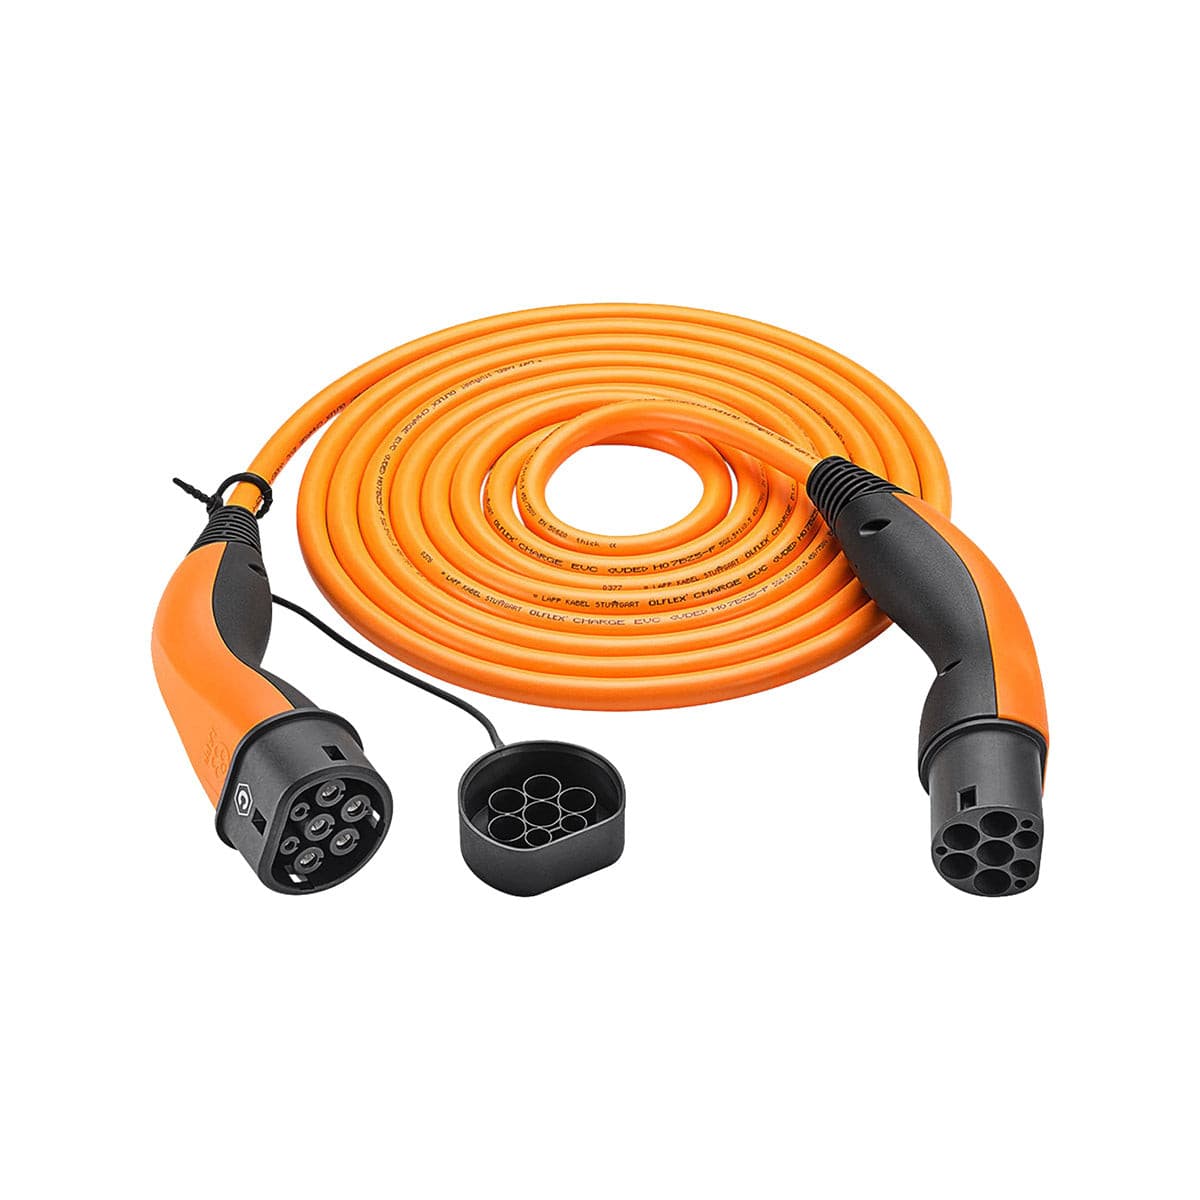 LAPP EV Helix Charge Cable Type 2 (11kW-3P-20A) 5m for Hybrid and Electric Cars - Orange.